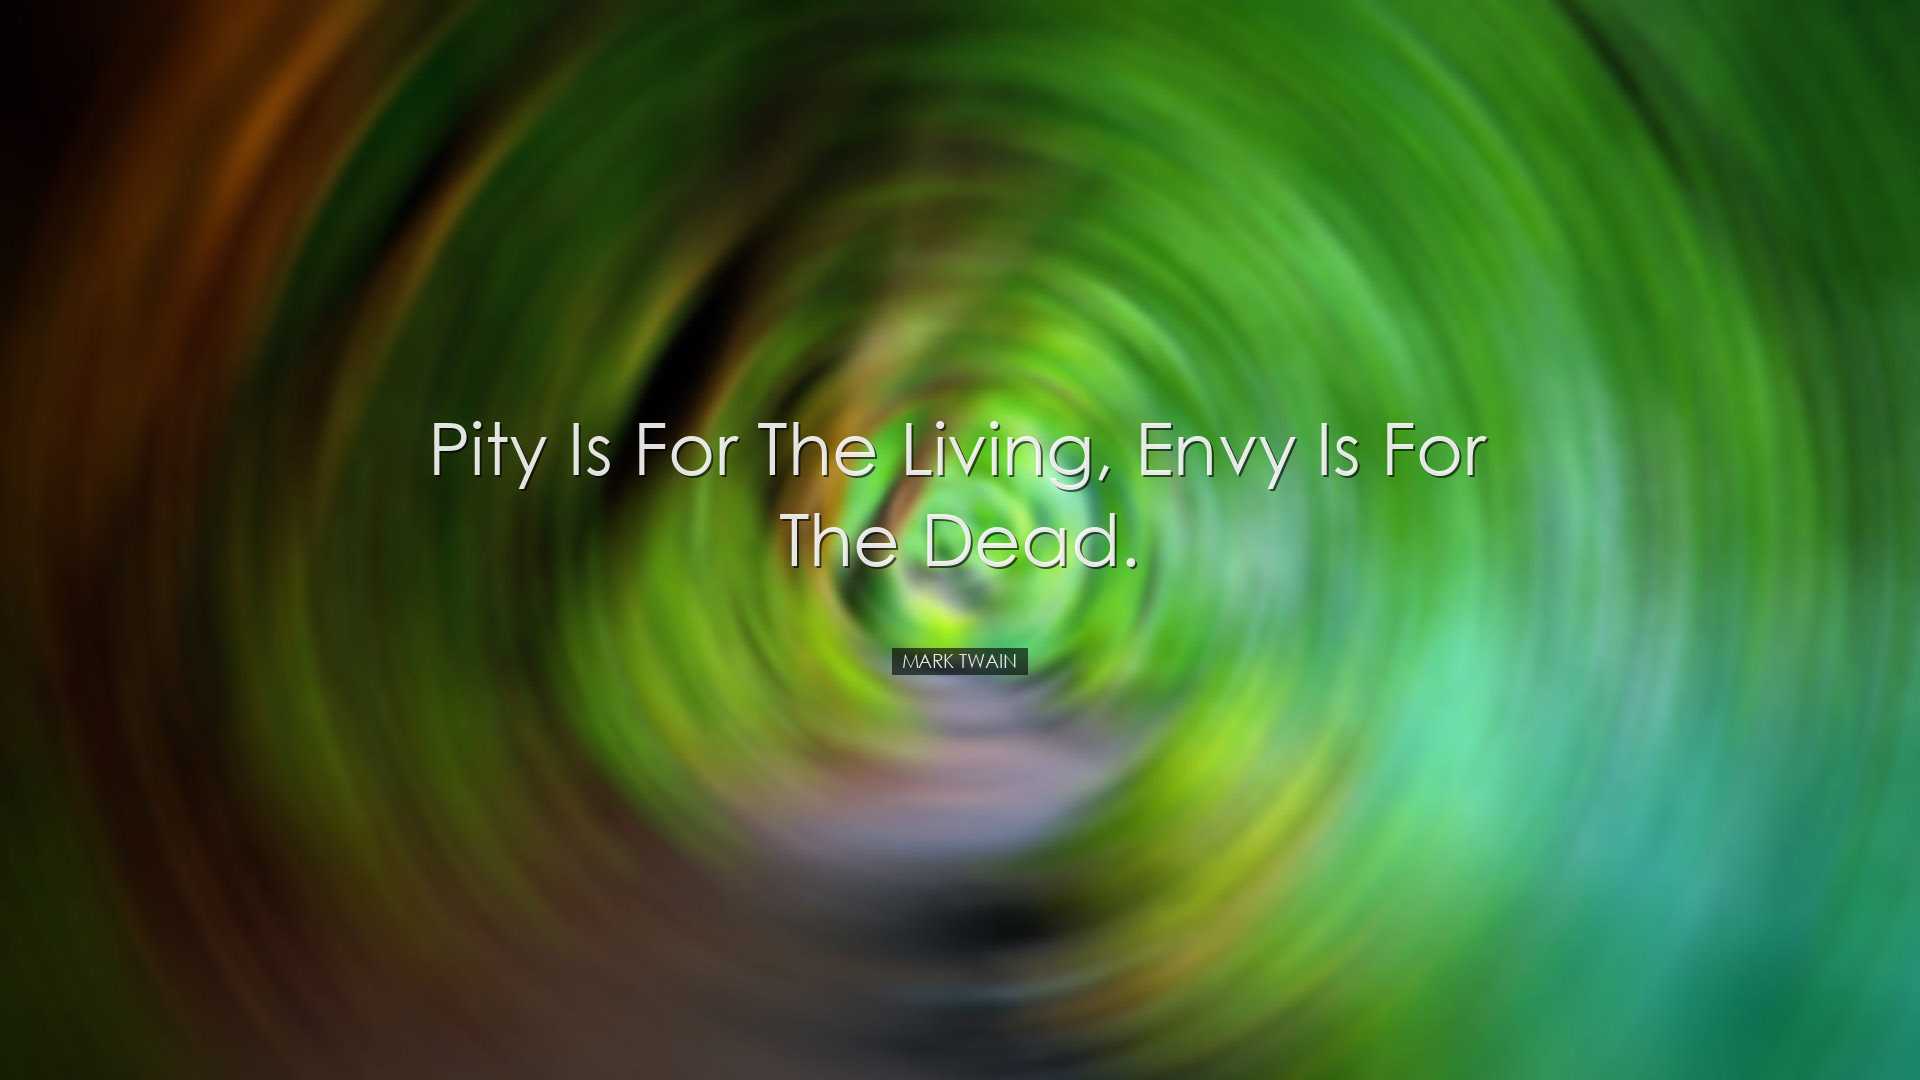 Pity is for the living, envy is for the dead. - Mark Twain